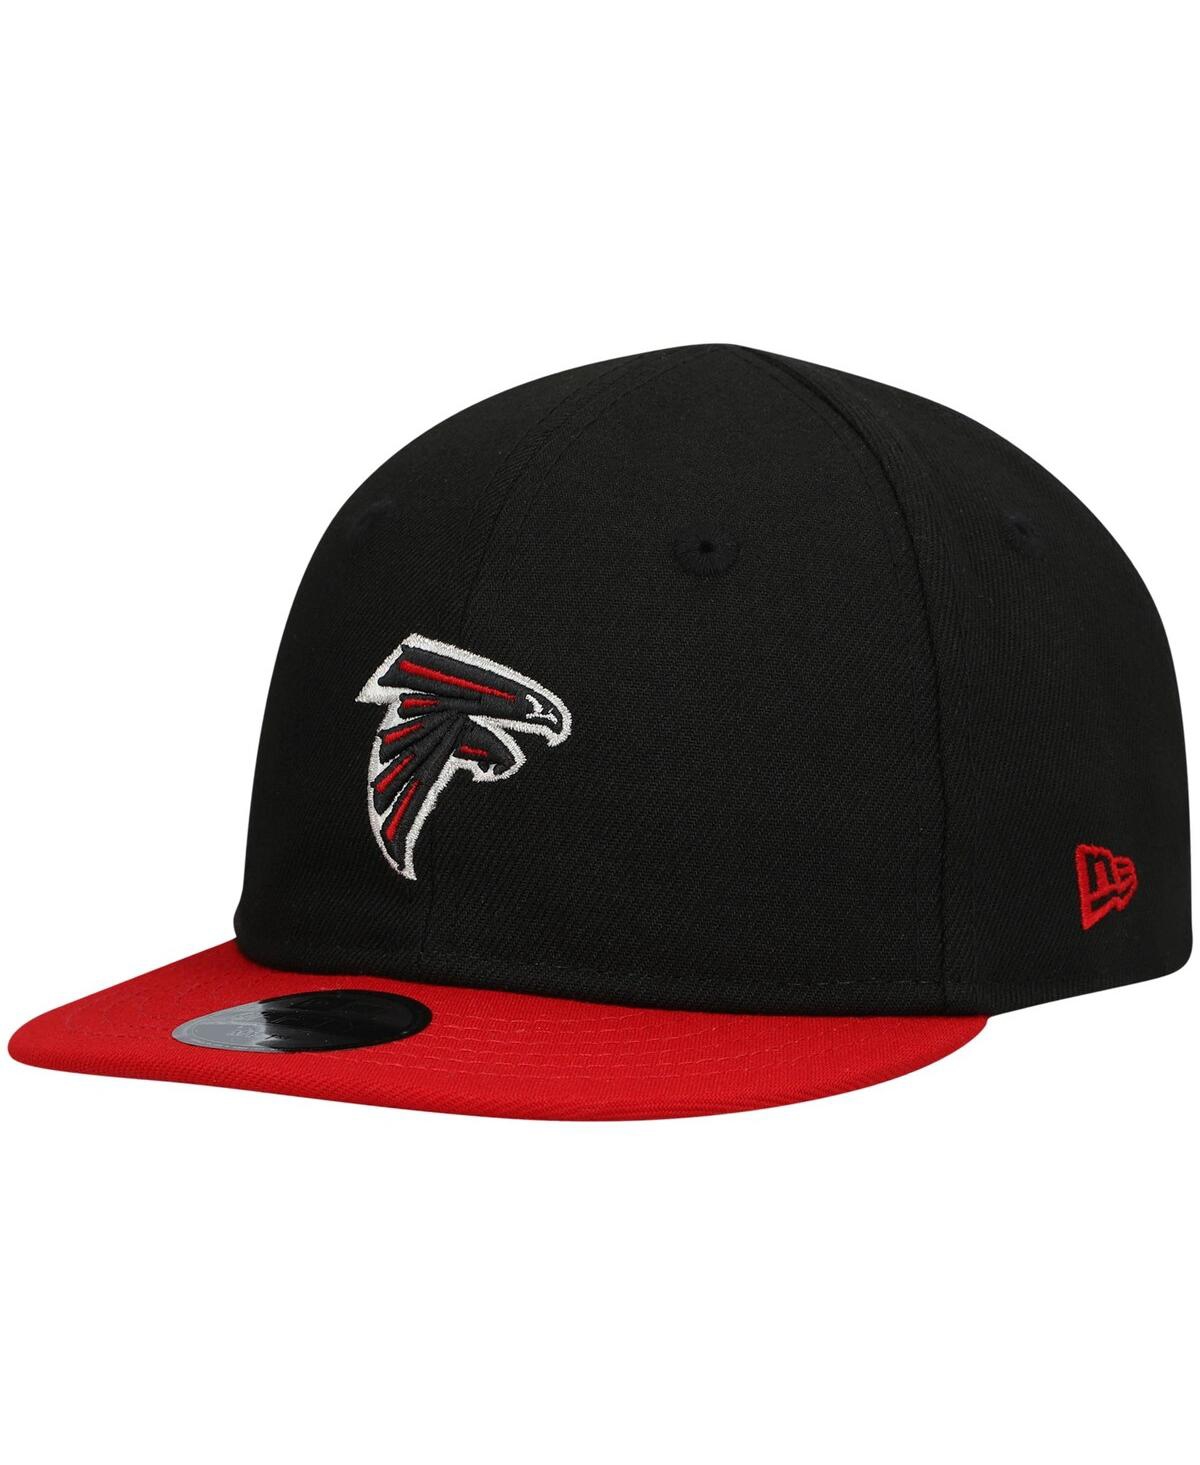 New Era Babies' Infant Unisex Black And Red Atlanta Falcons My 1st 9fifty Adjustable Hat In Black,red